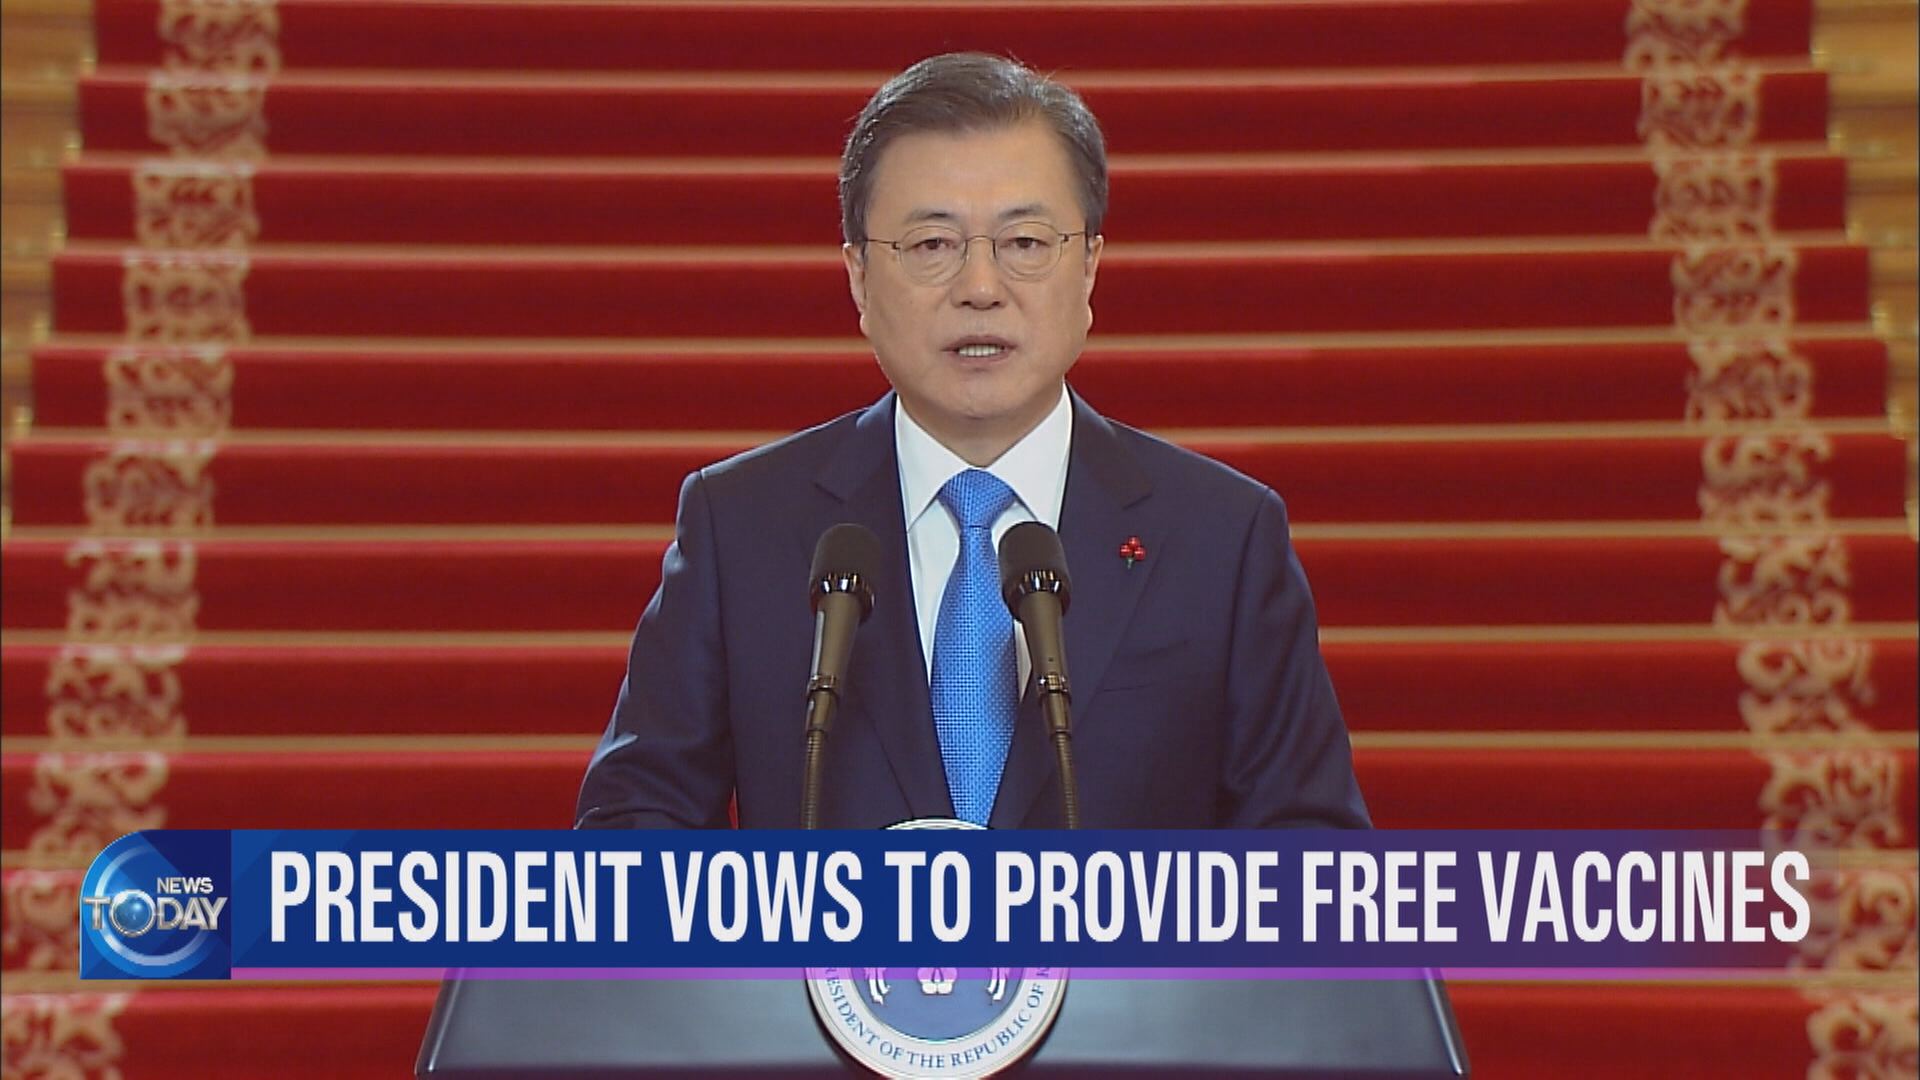 PRESIDENT VOWS TO PROVIDE FREE VACCINES